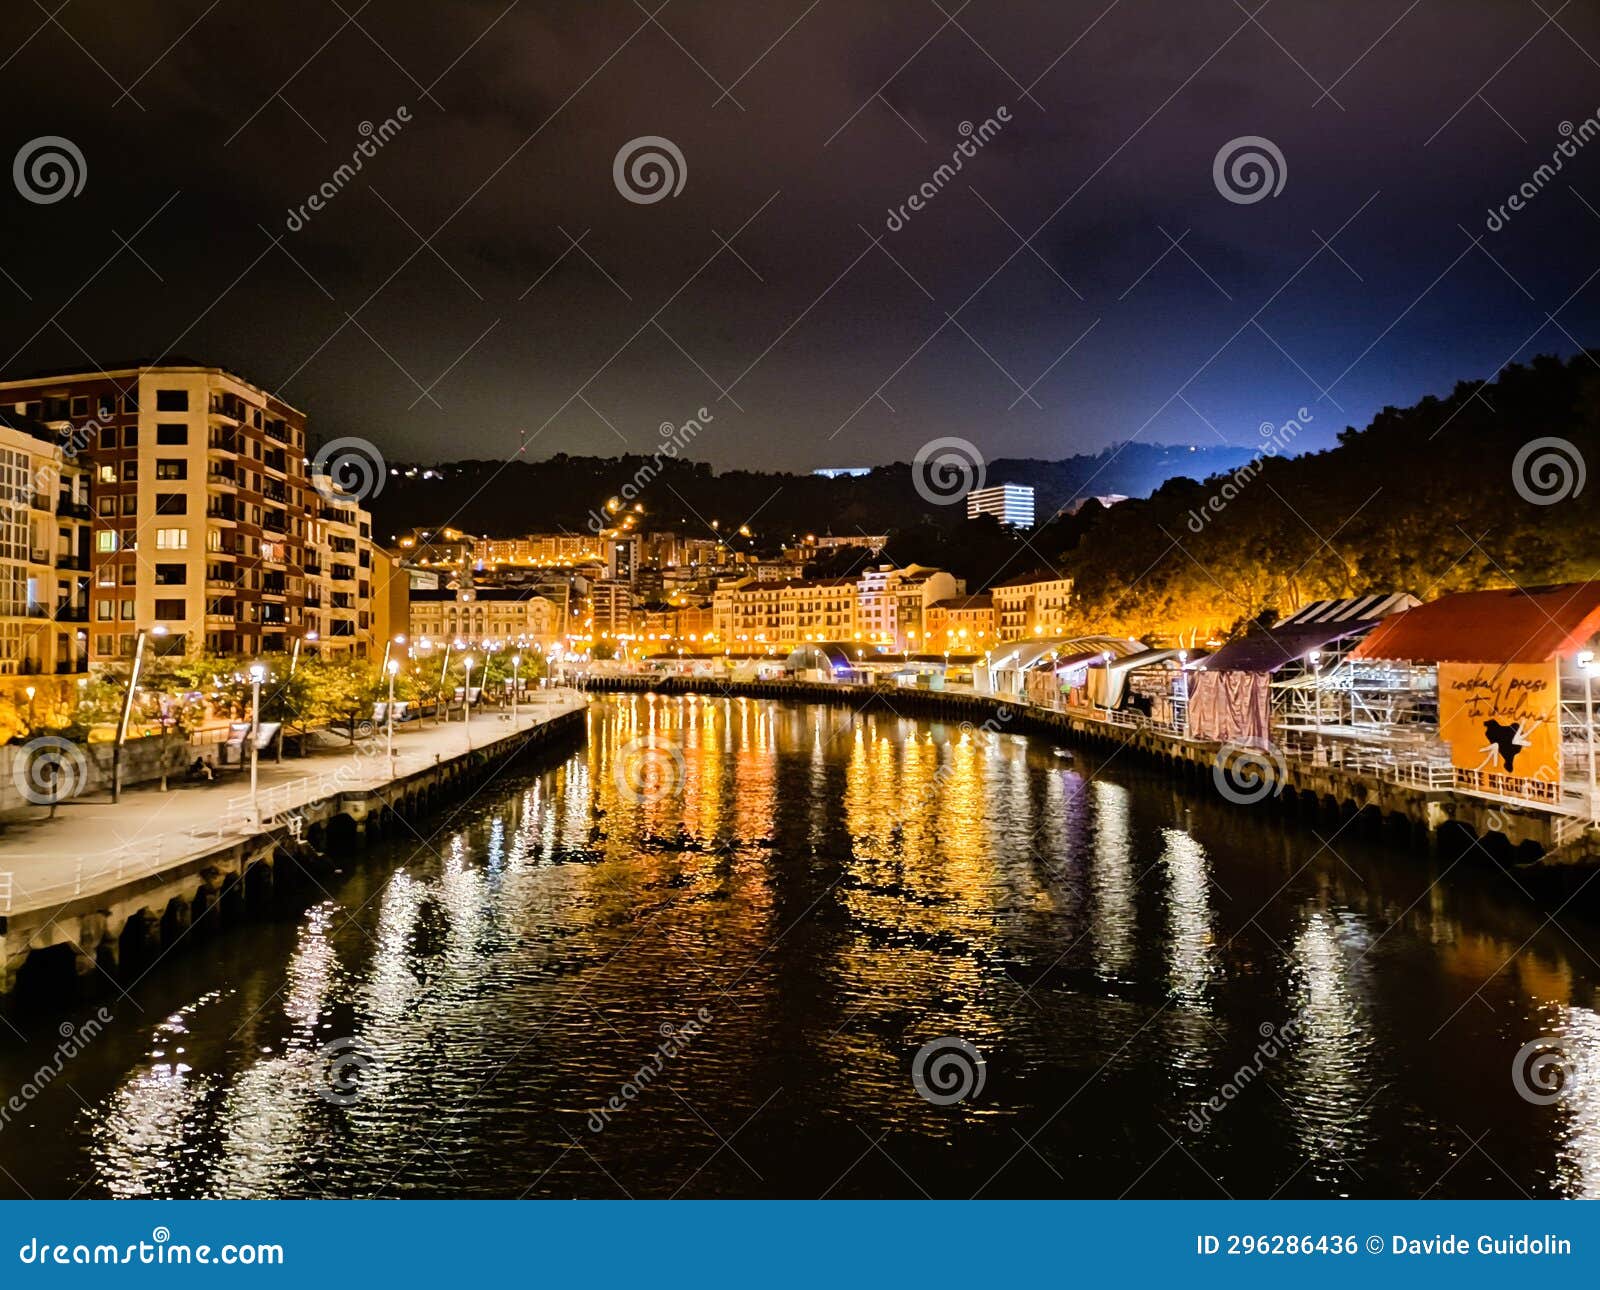 bilbao night view. nervion river perpective view, spain